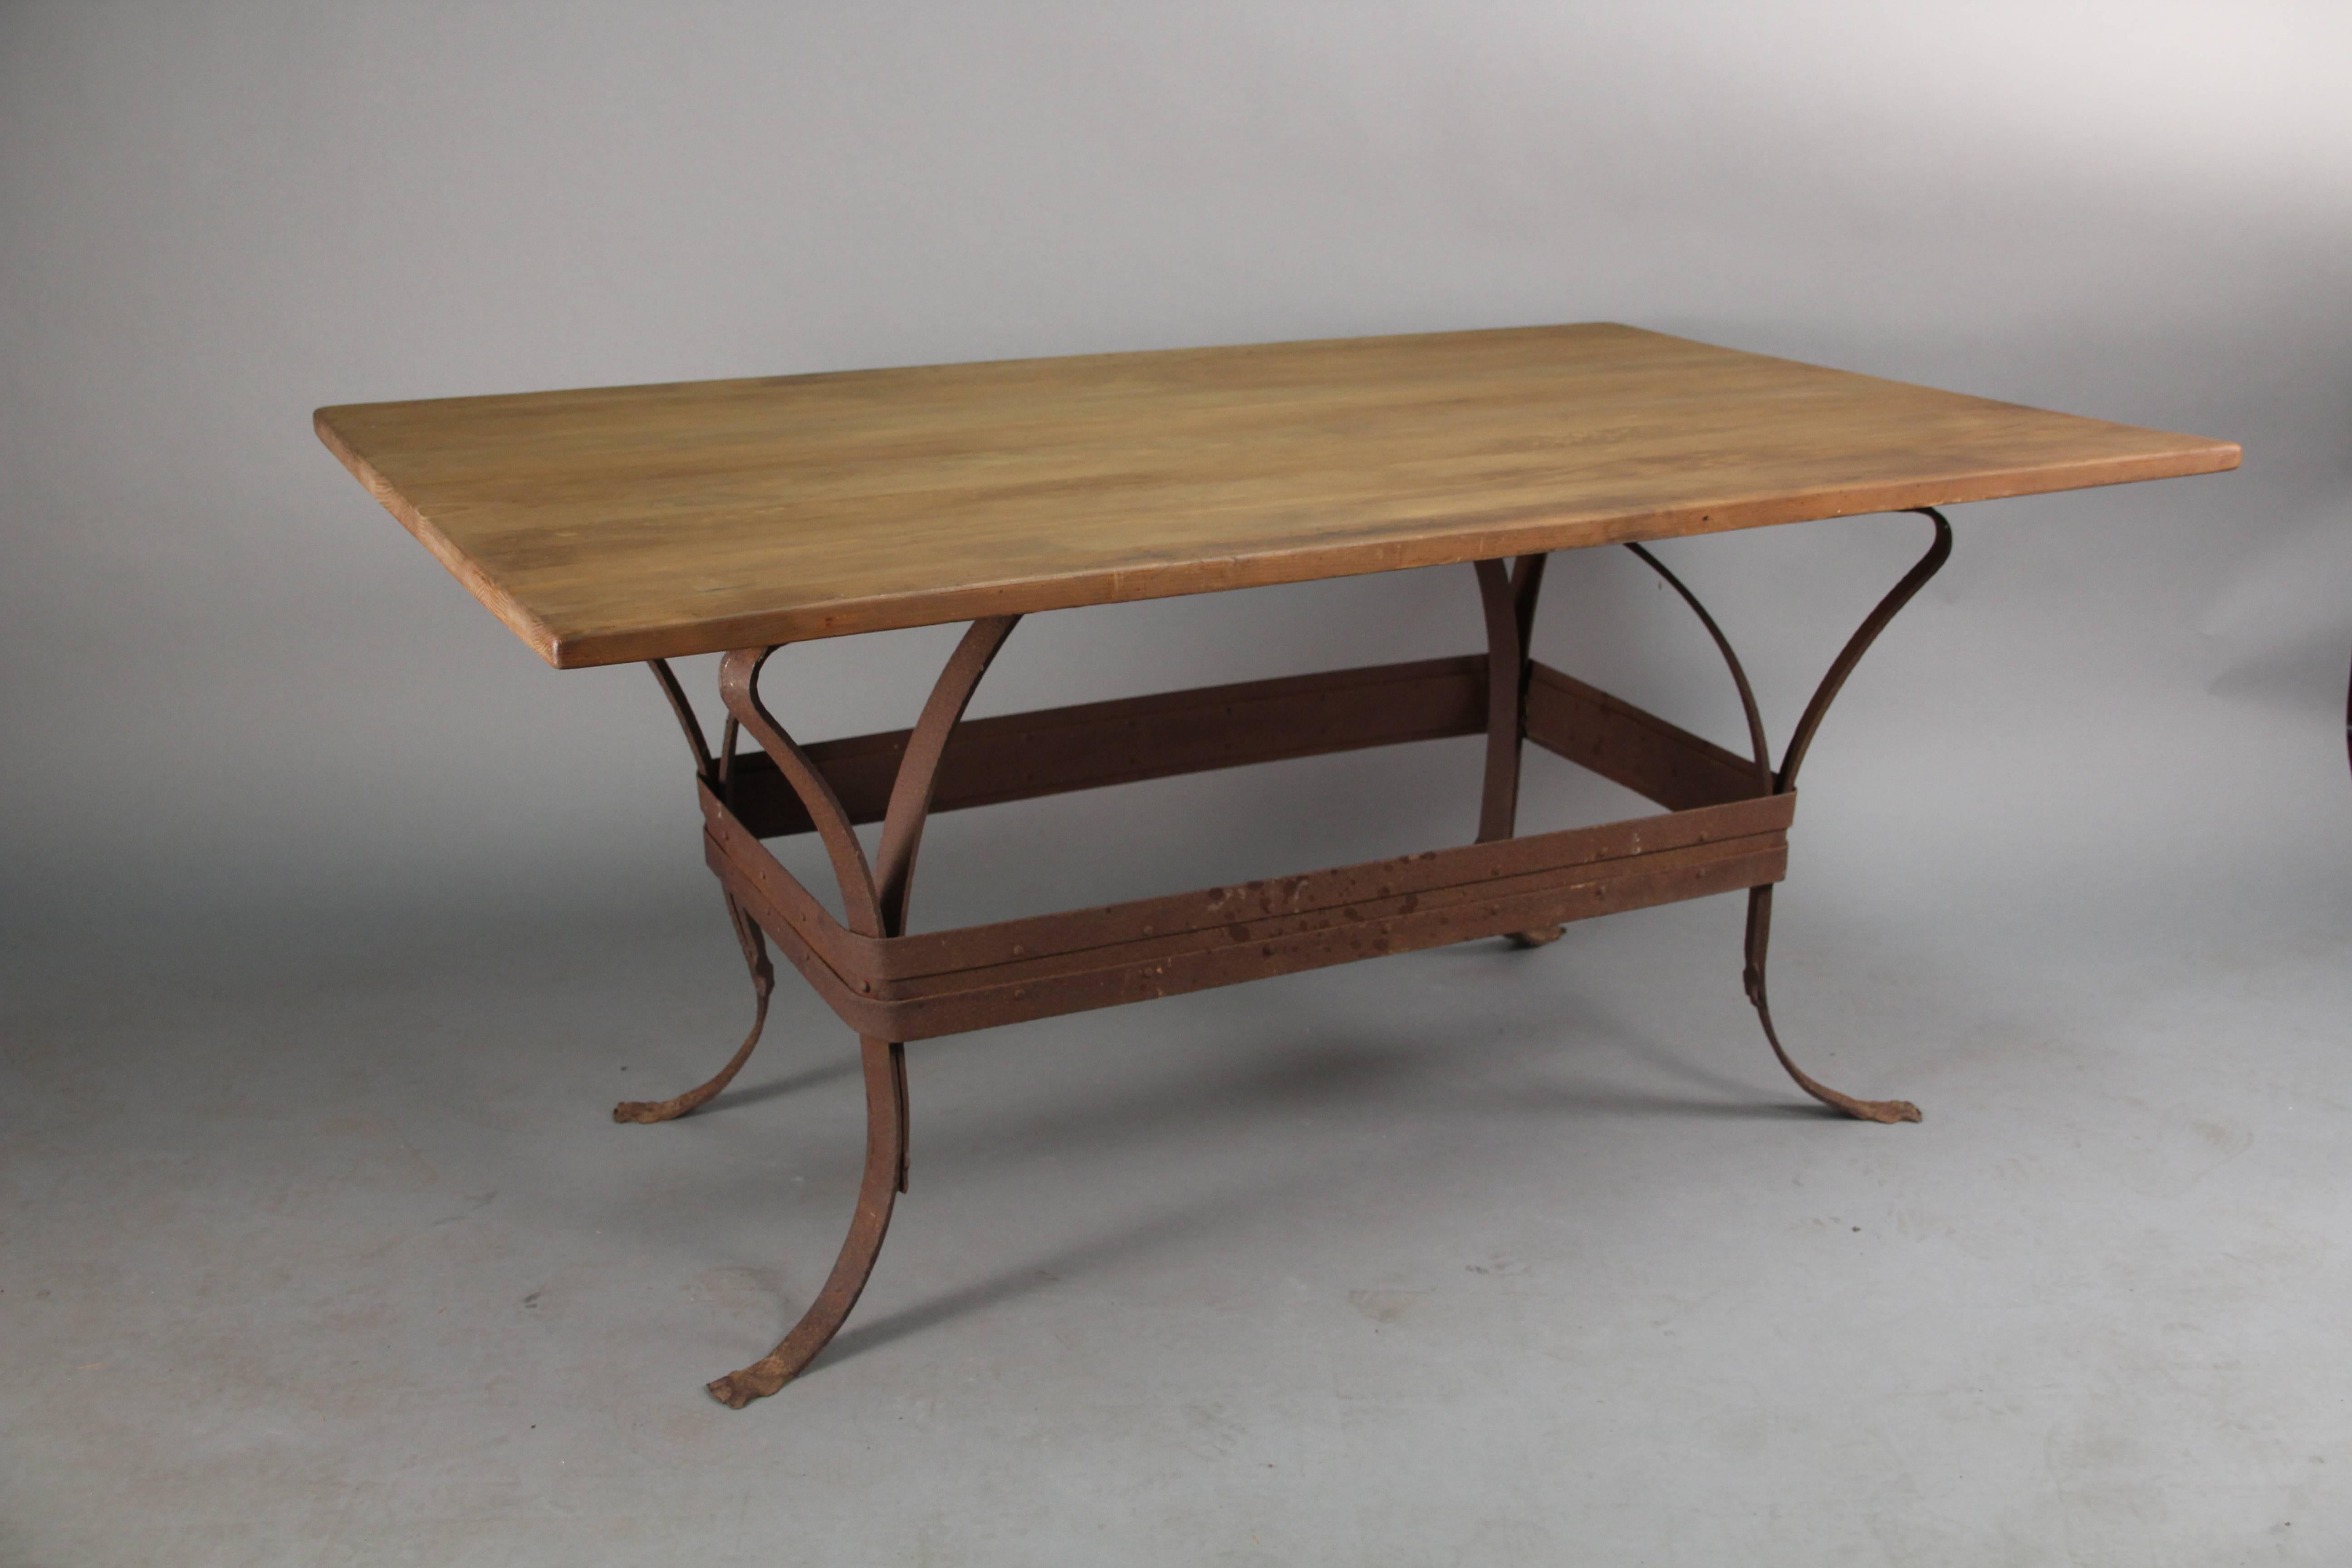 Rusty iron table base with great design and riveted construction. The top is a salvaged and worn.